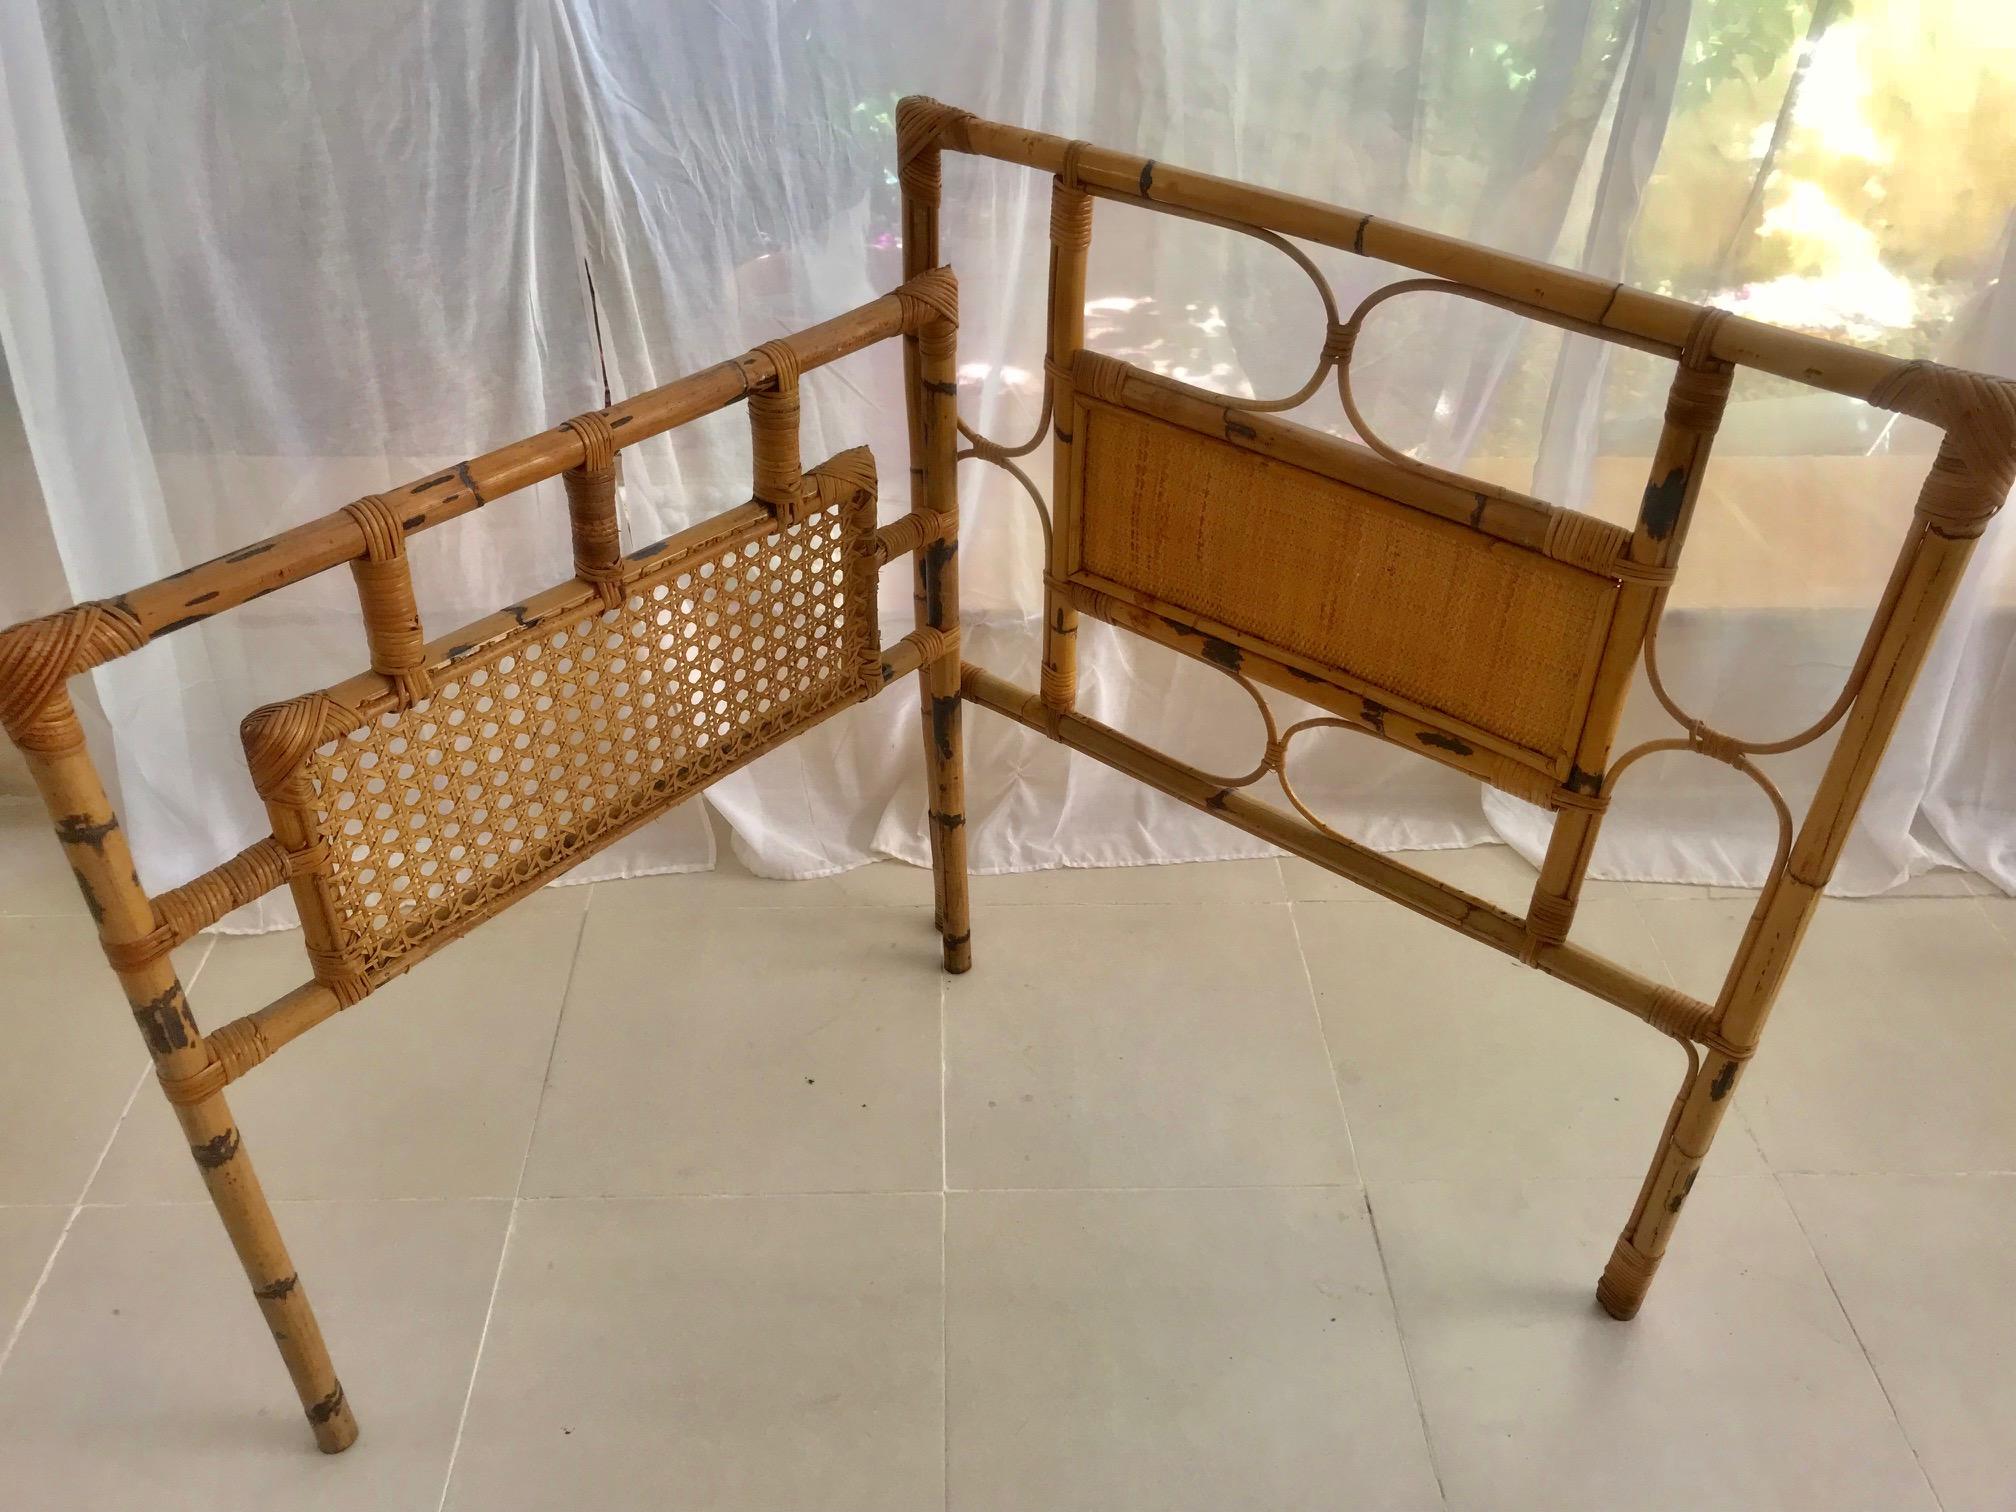 Lovely handcrafted rattan shape details.
This piece has all the taste of the Saint Tropez Riviera Mediterranean coast style and it is in excellent vintage condition.
South France Riviera, 1950s.
Beautiful to place in interior decoration with